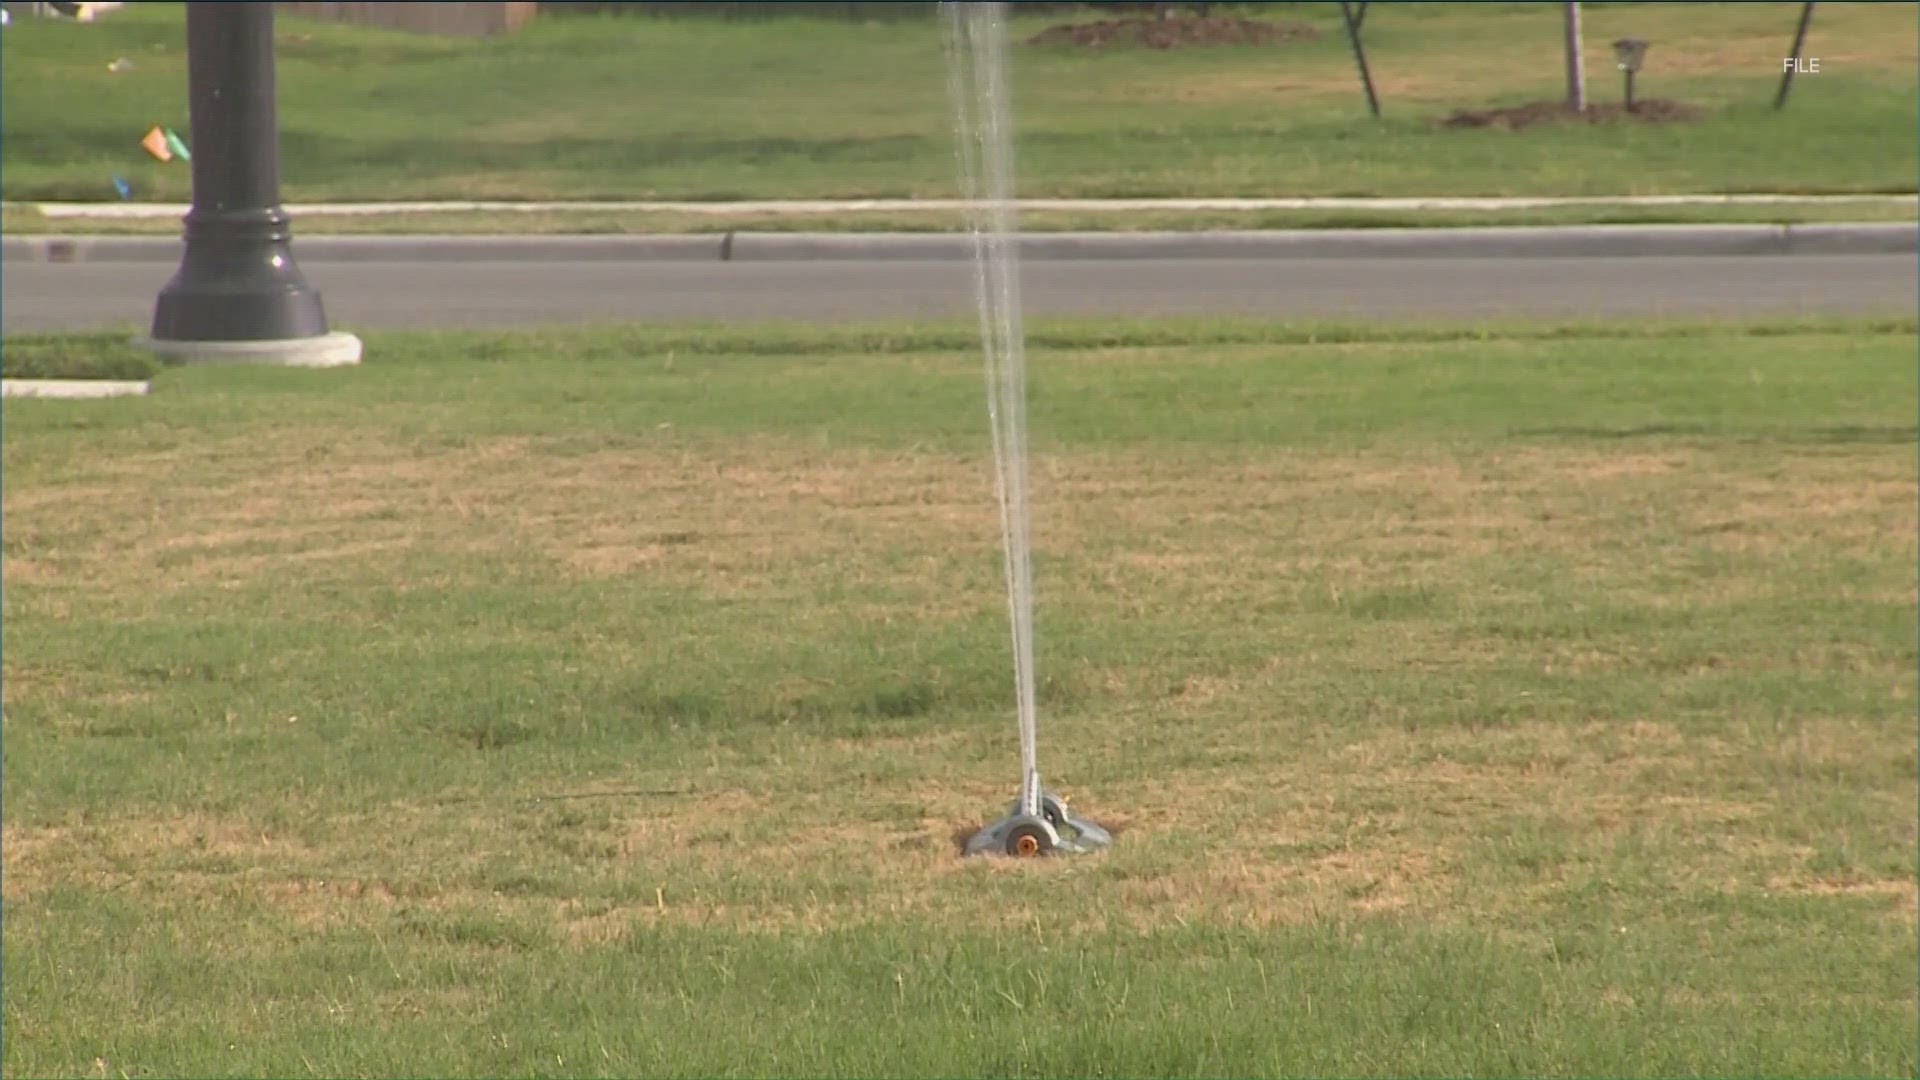 Multiple Central Texas cities are asking residents to cut back on water usage. It comes as temperatures hit record highs.